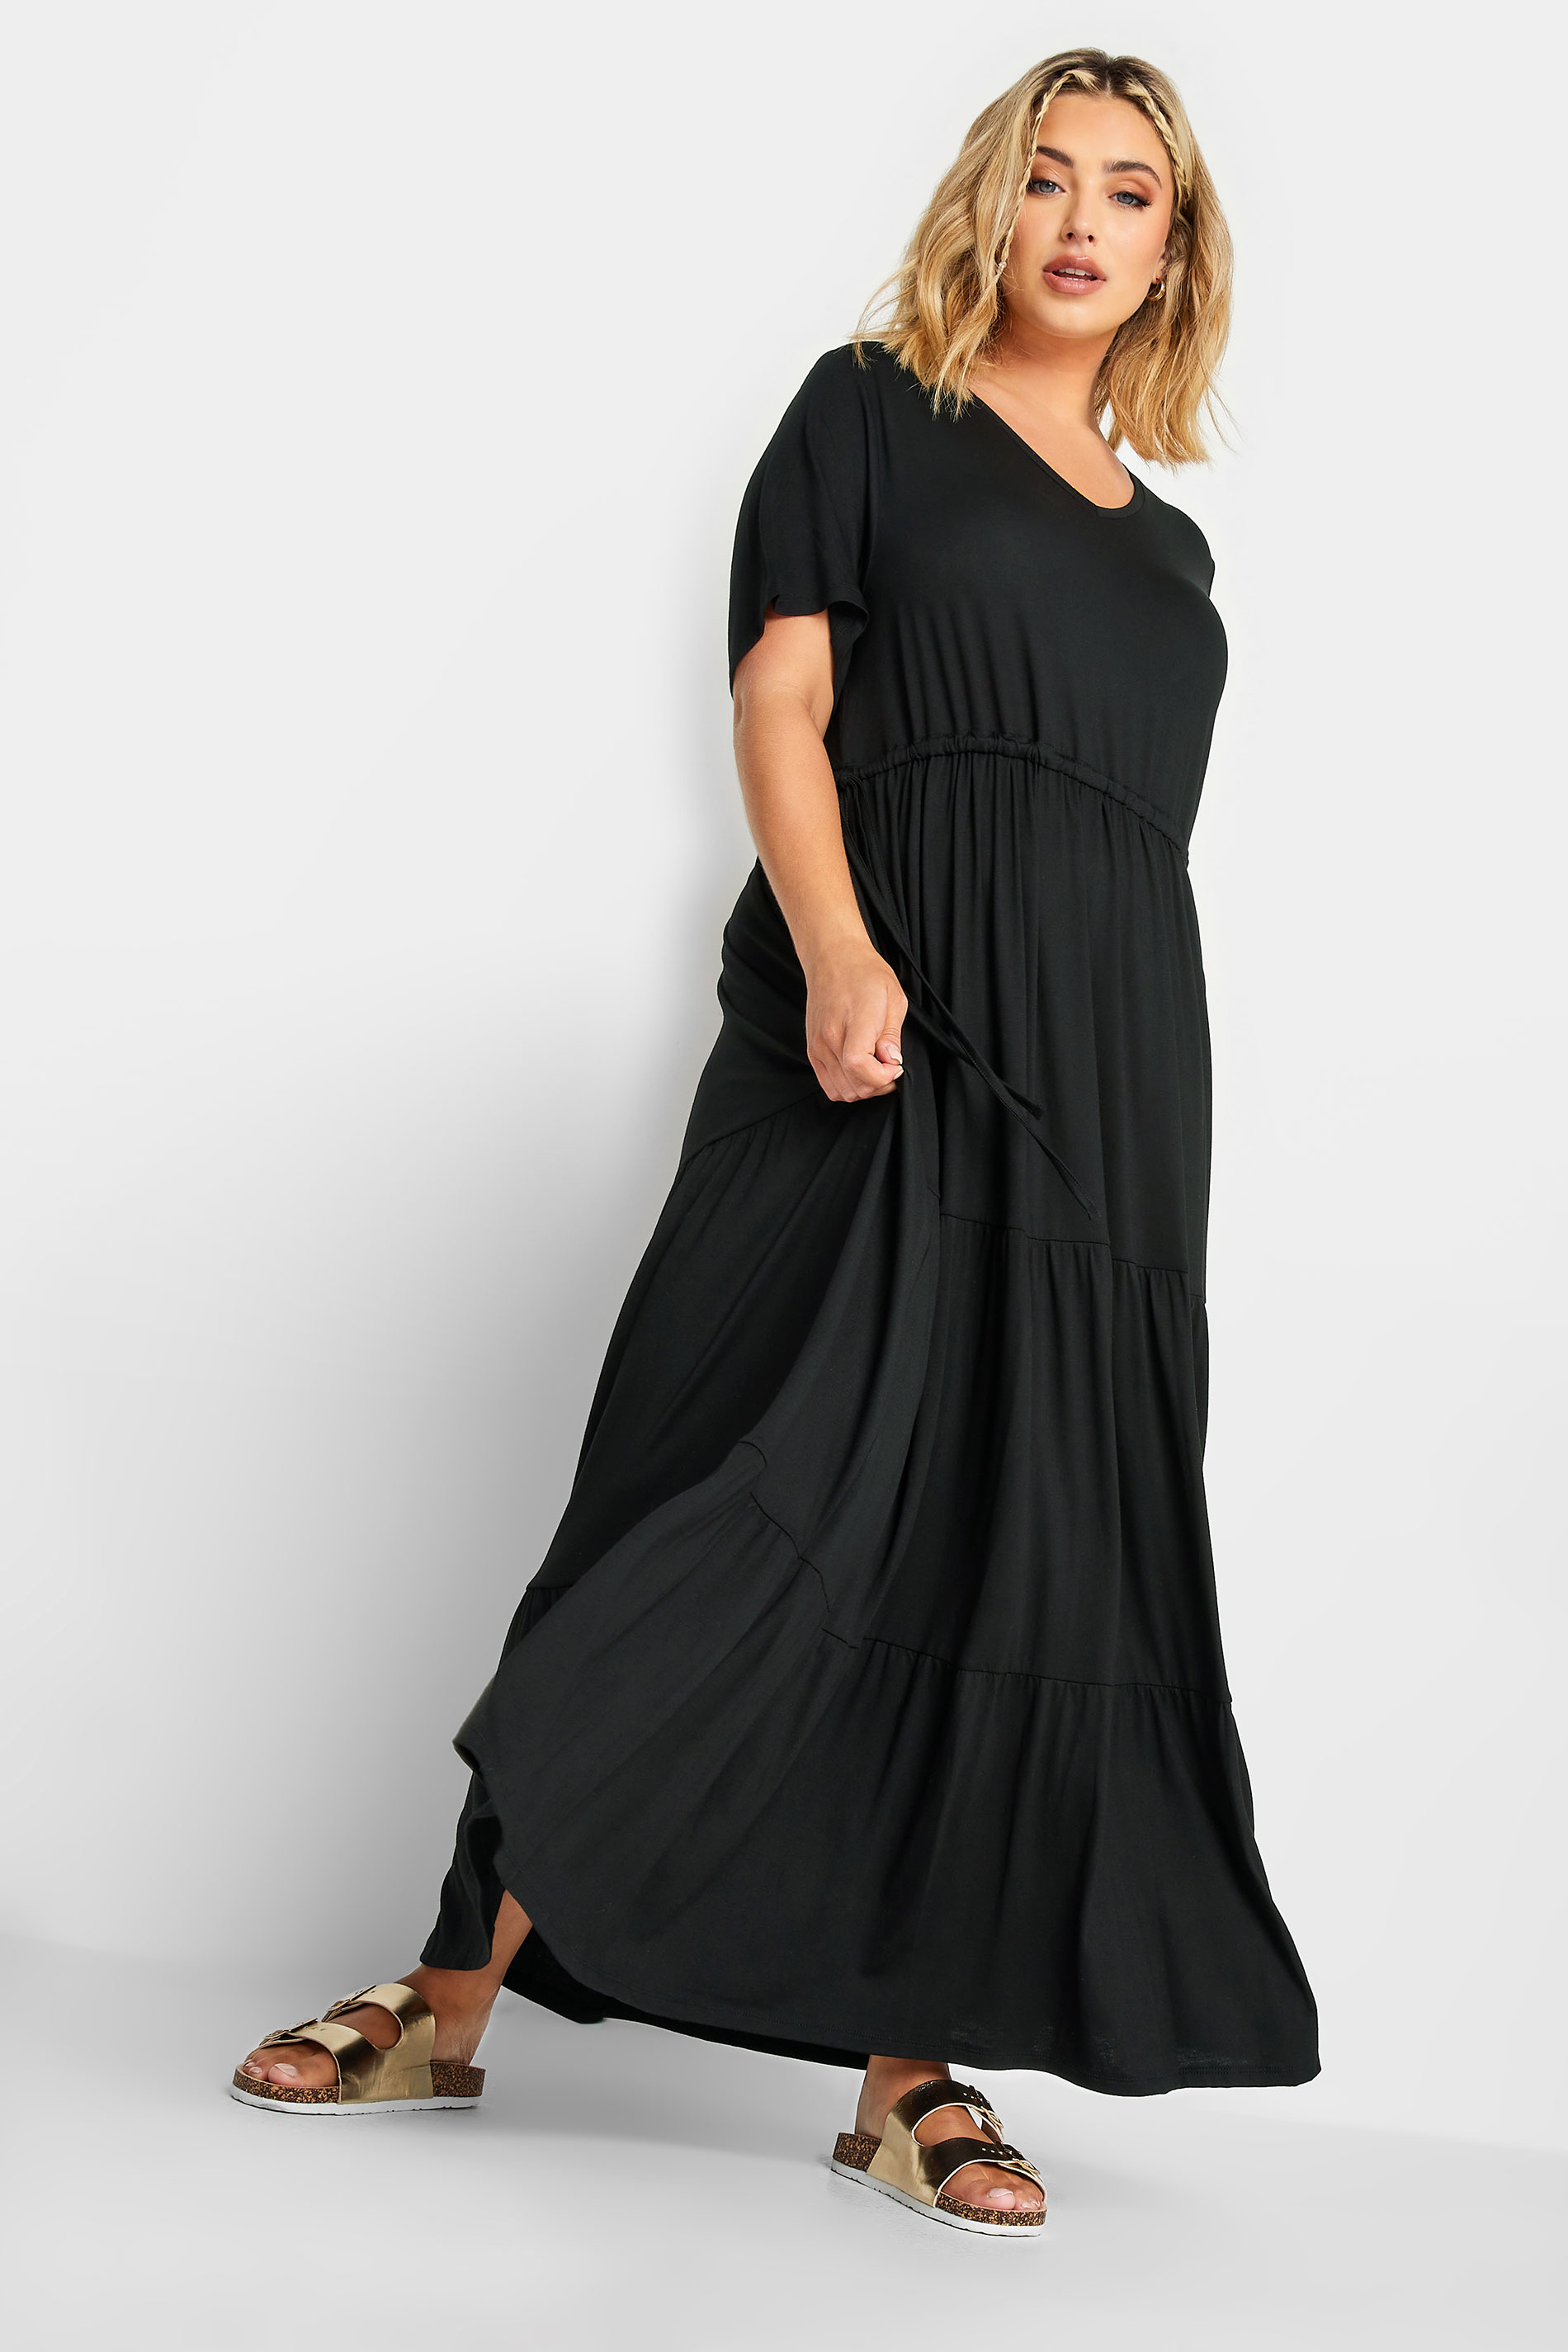 LIMITED COLLECTION Plus Size Black Maxi Adjustable Waist Dress | Yours ...